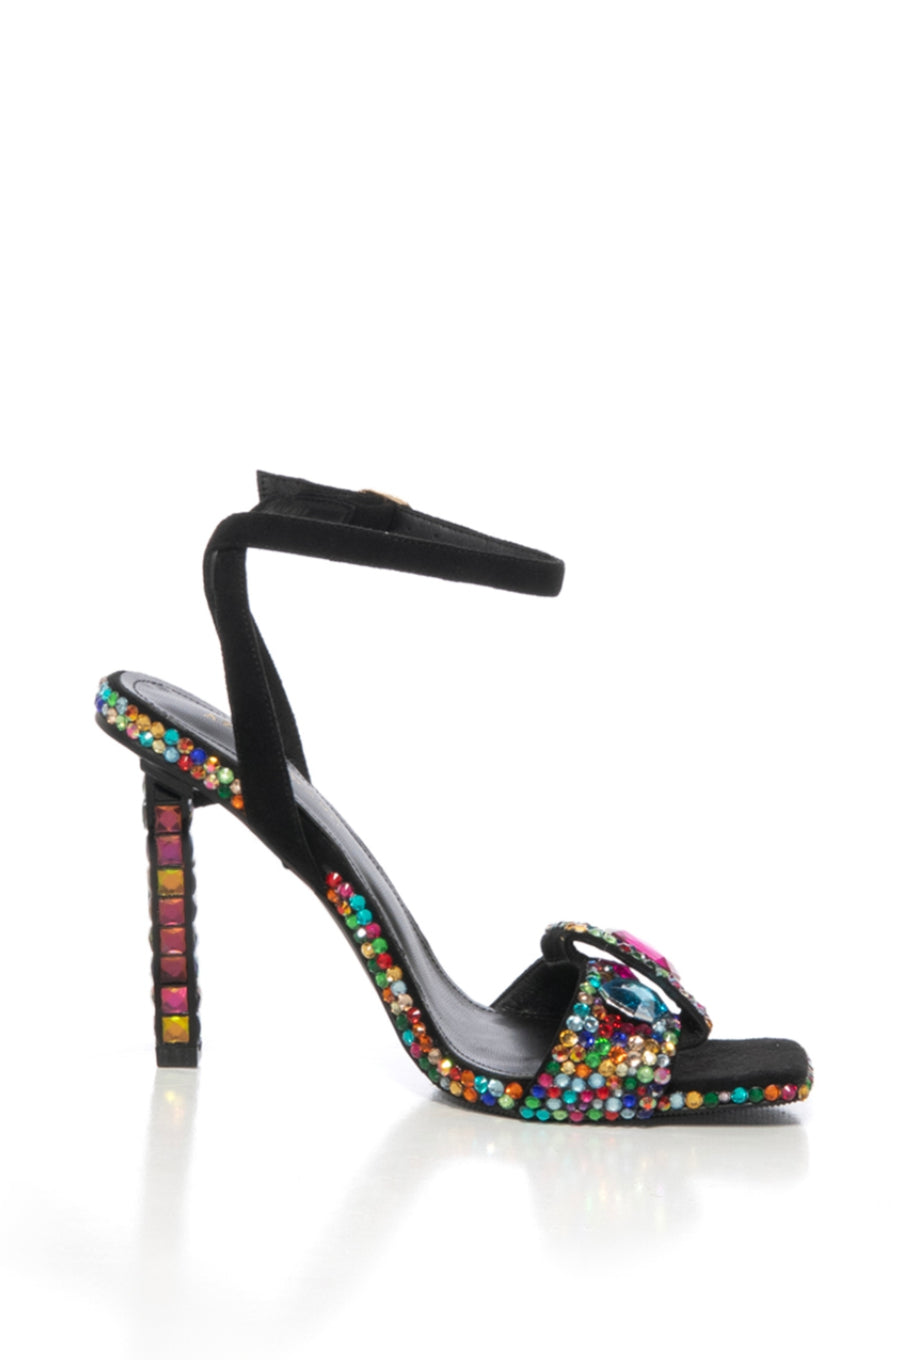 black open toe heeled strappy sandals with an ankle strap and multicolored rhinestone detail